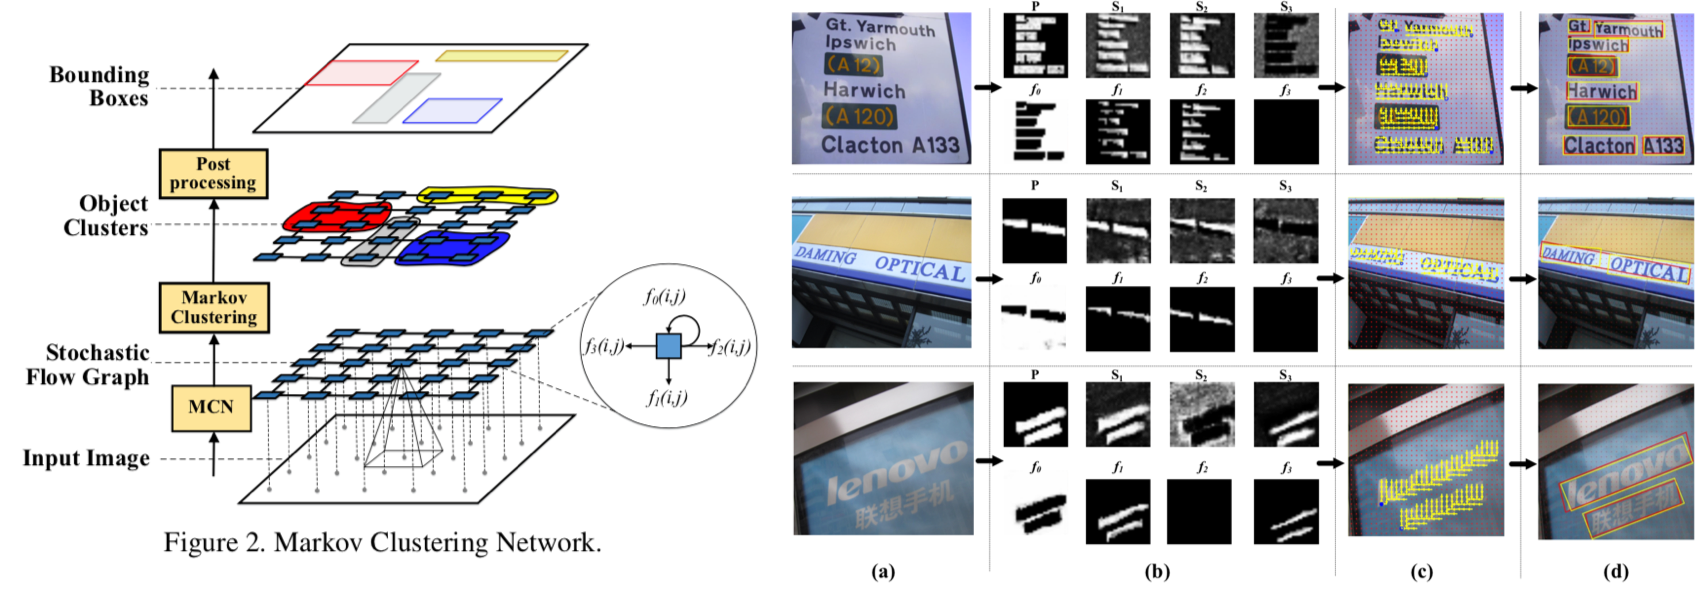 fukuhara-Learning_Markov_Clustering_Networks_for_Scene_Text_Detection.png